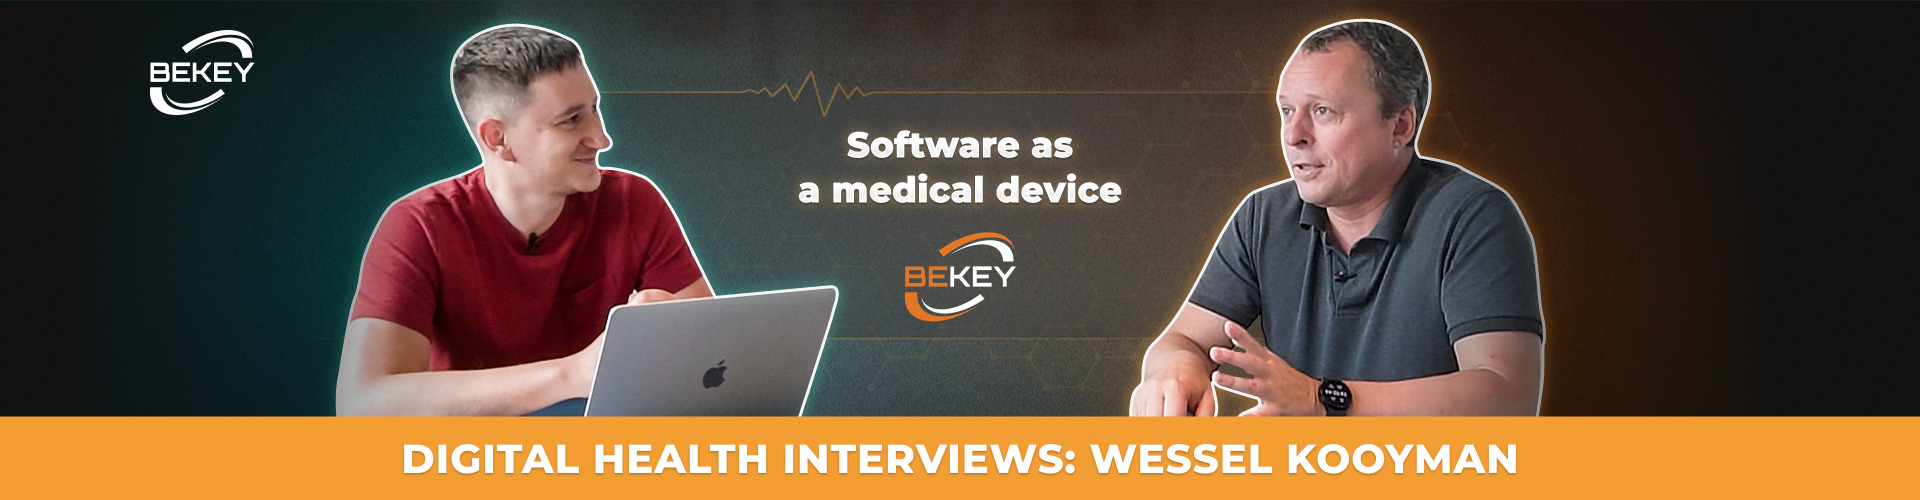 Software as a Medical Device. Digital Health Interviews: Wessel Kooyman - image